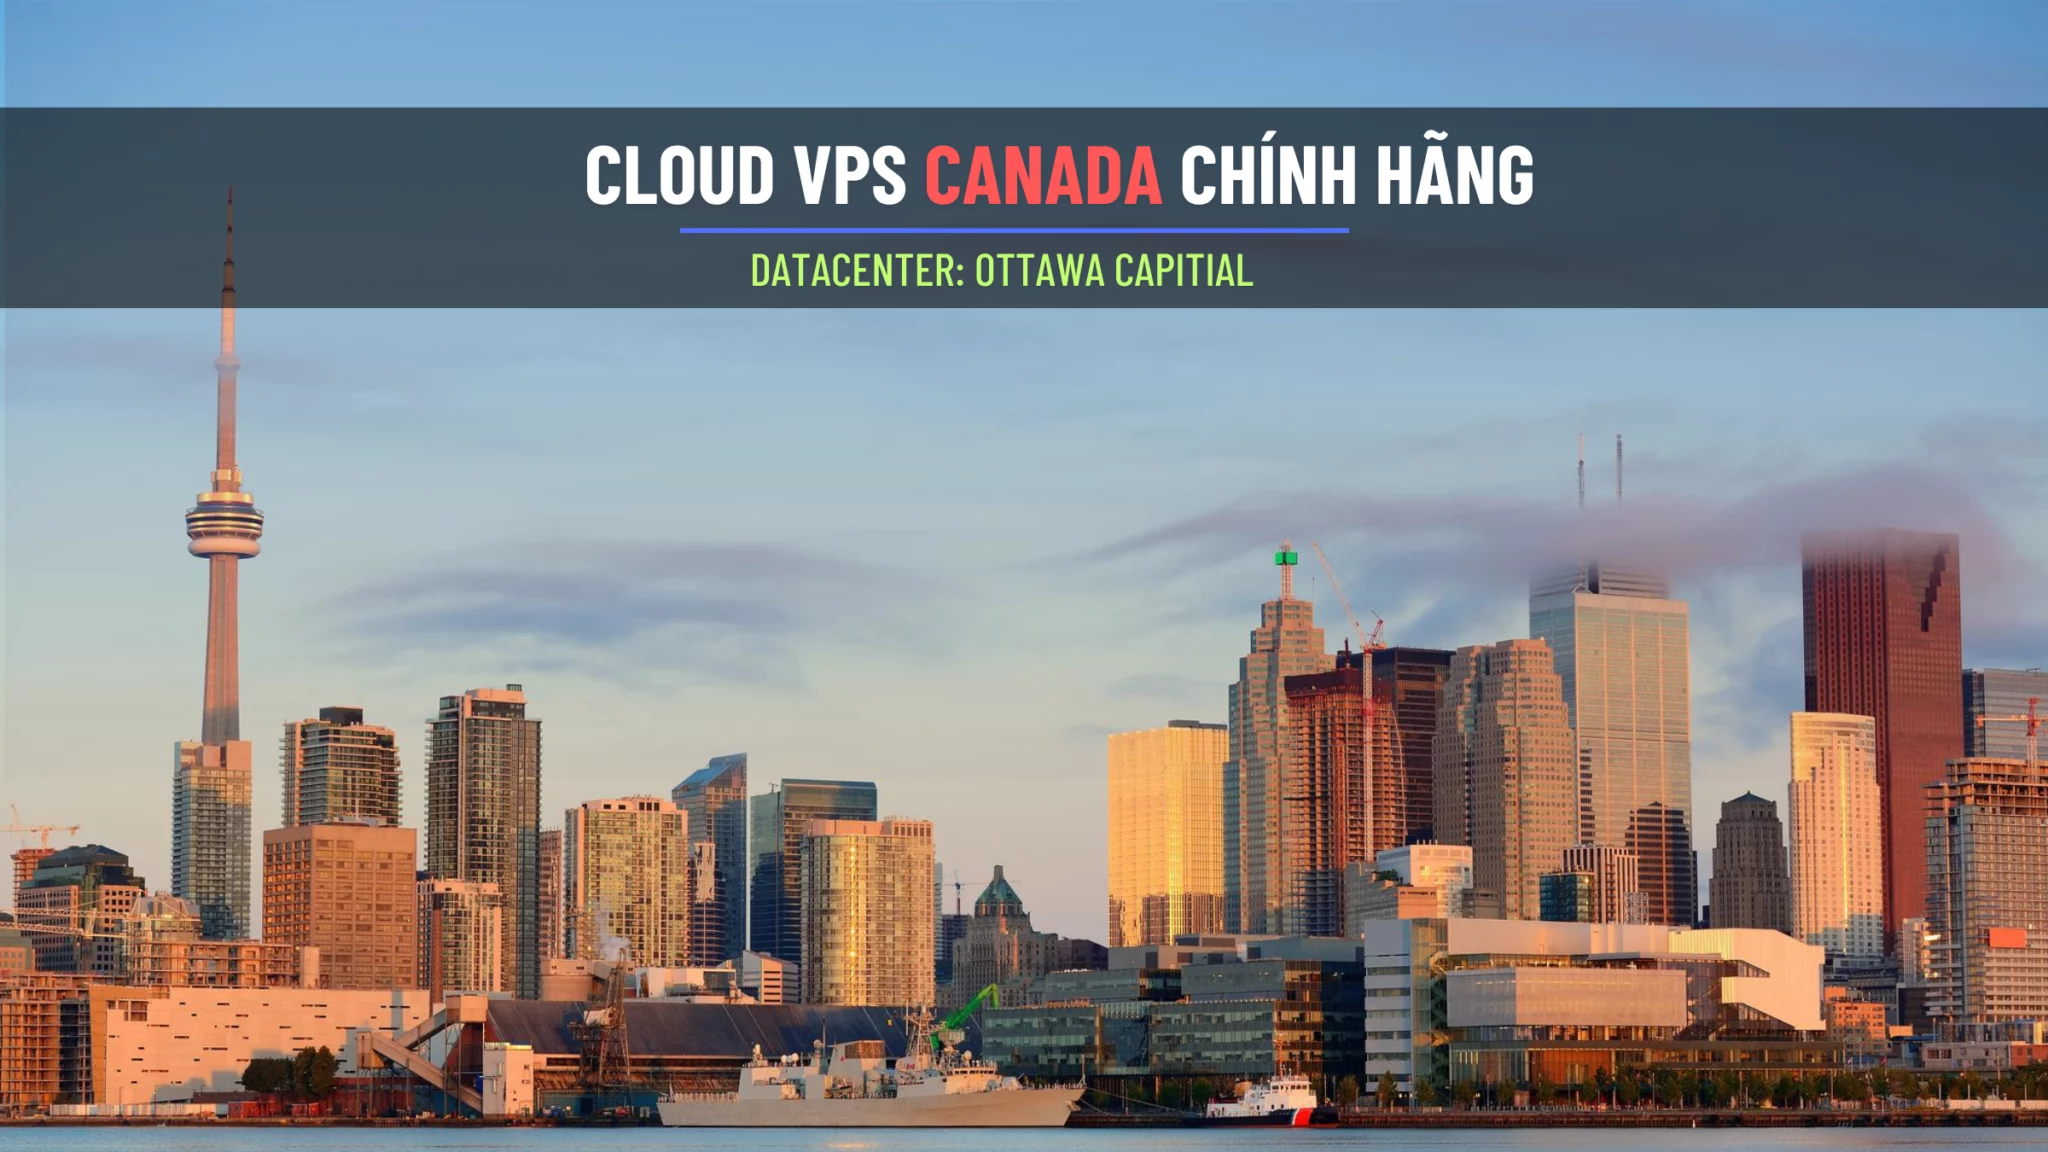 VPS Canada chinh hãng